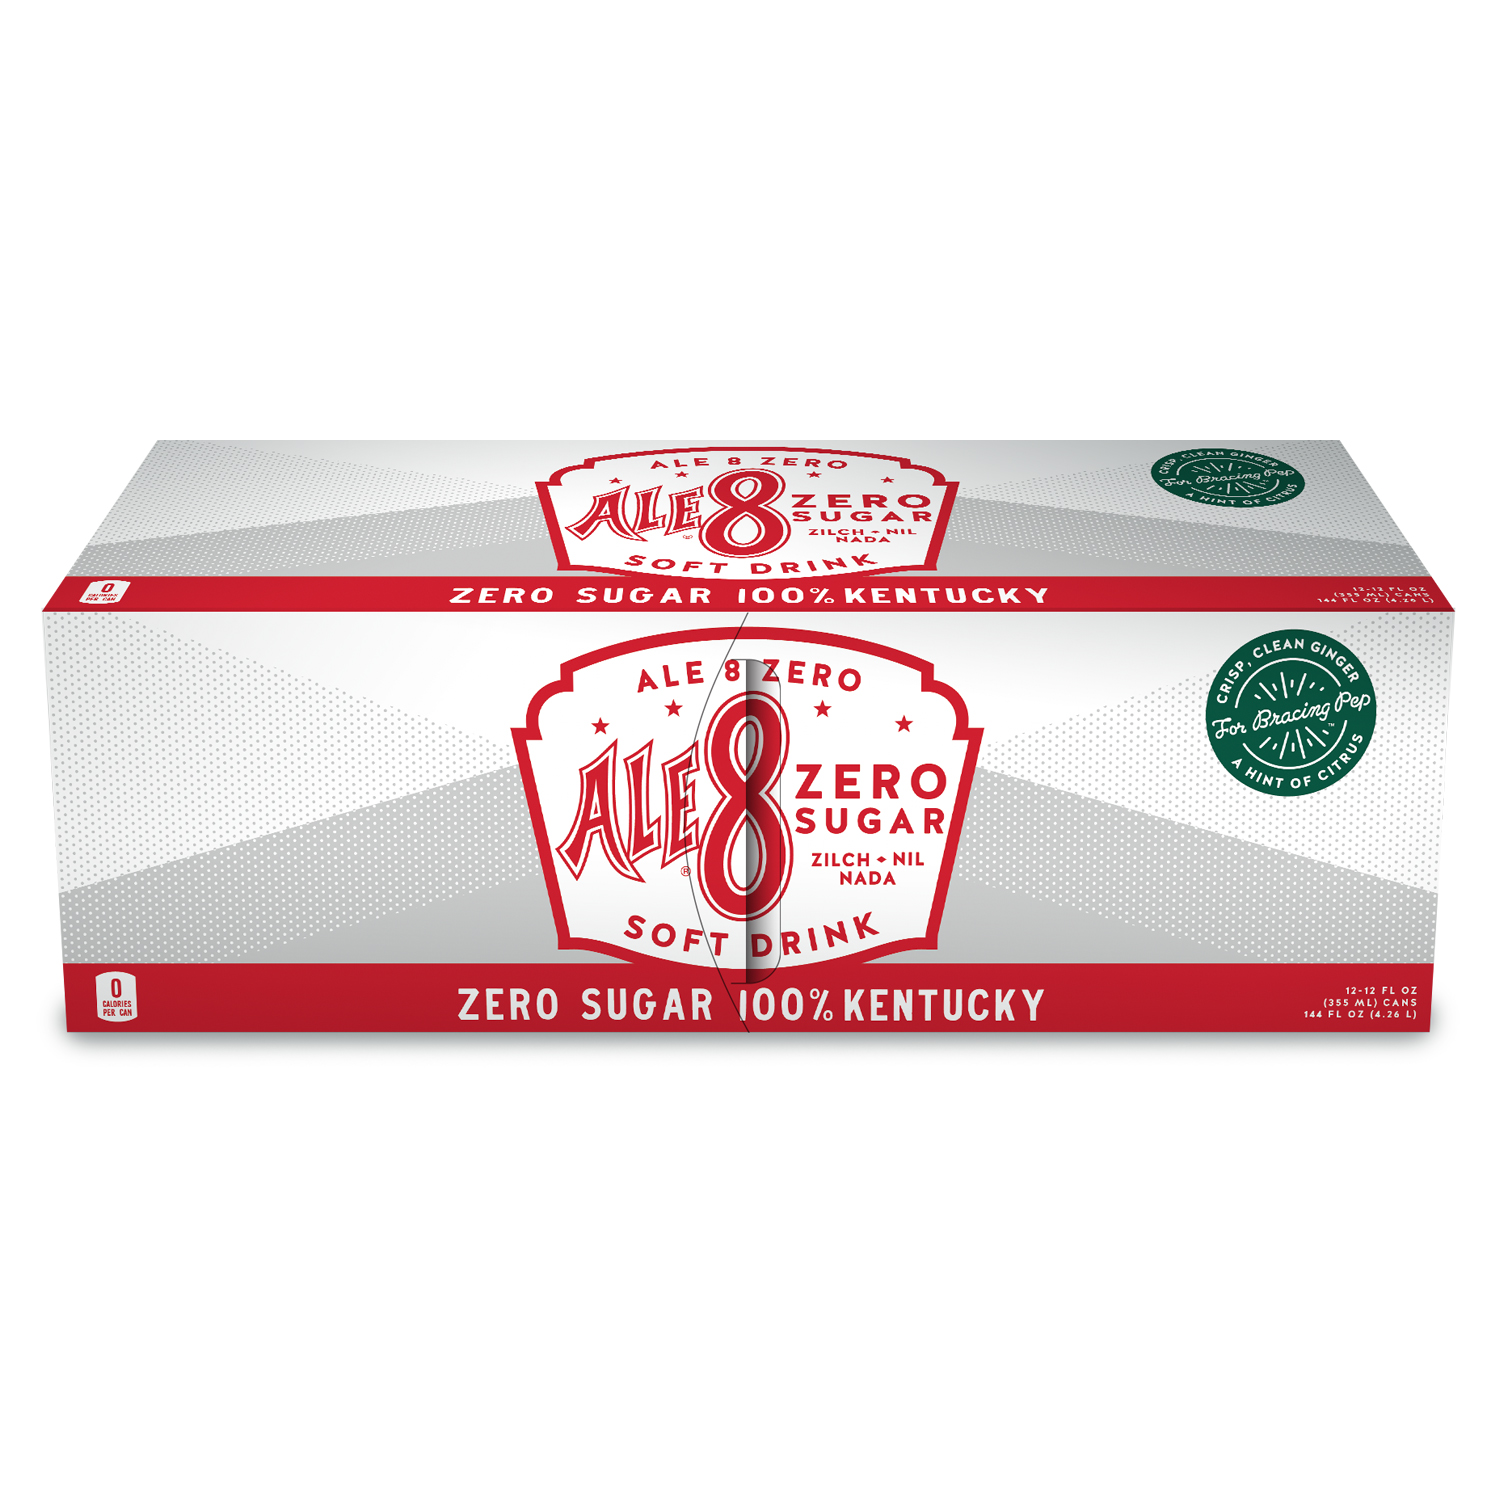 Ale-8-One Zero Ginger Ale Soda Pop, 12 Fl Oz, 12 Pack Cans - image 1 of 2